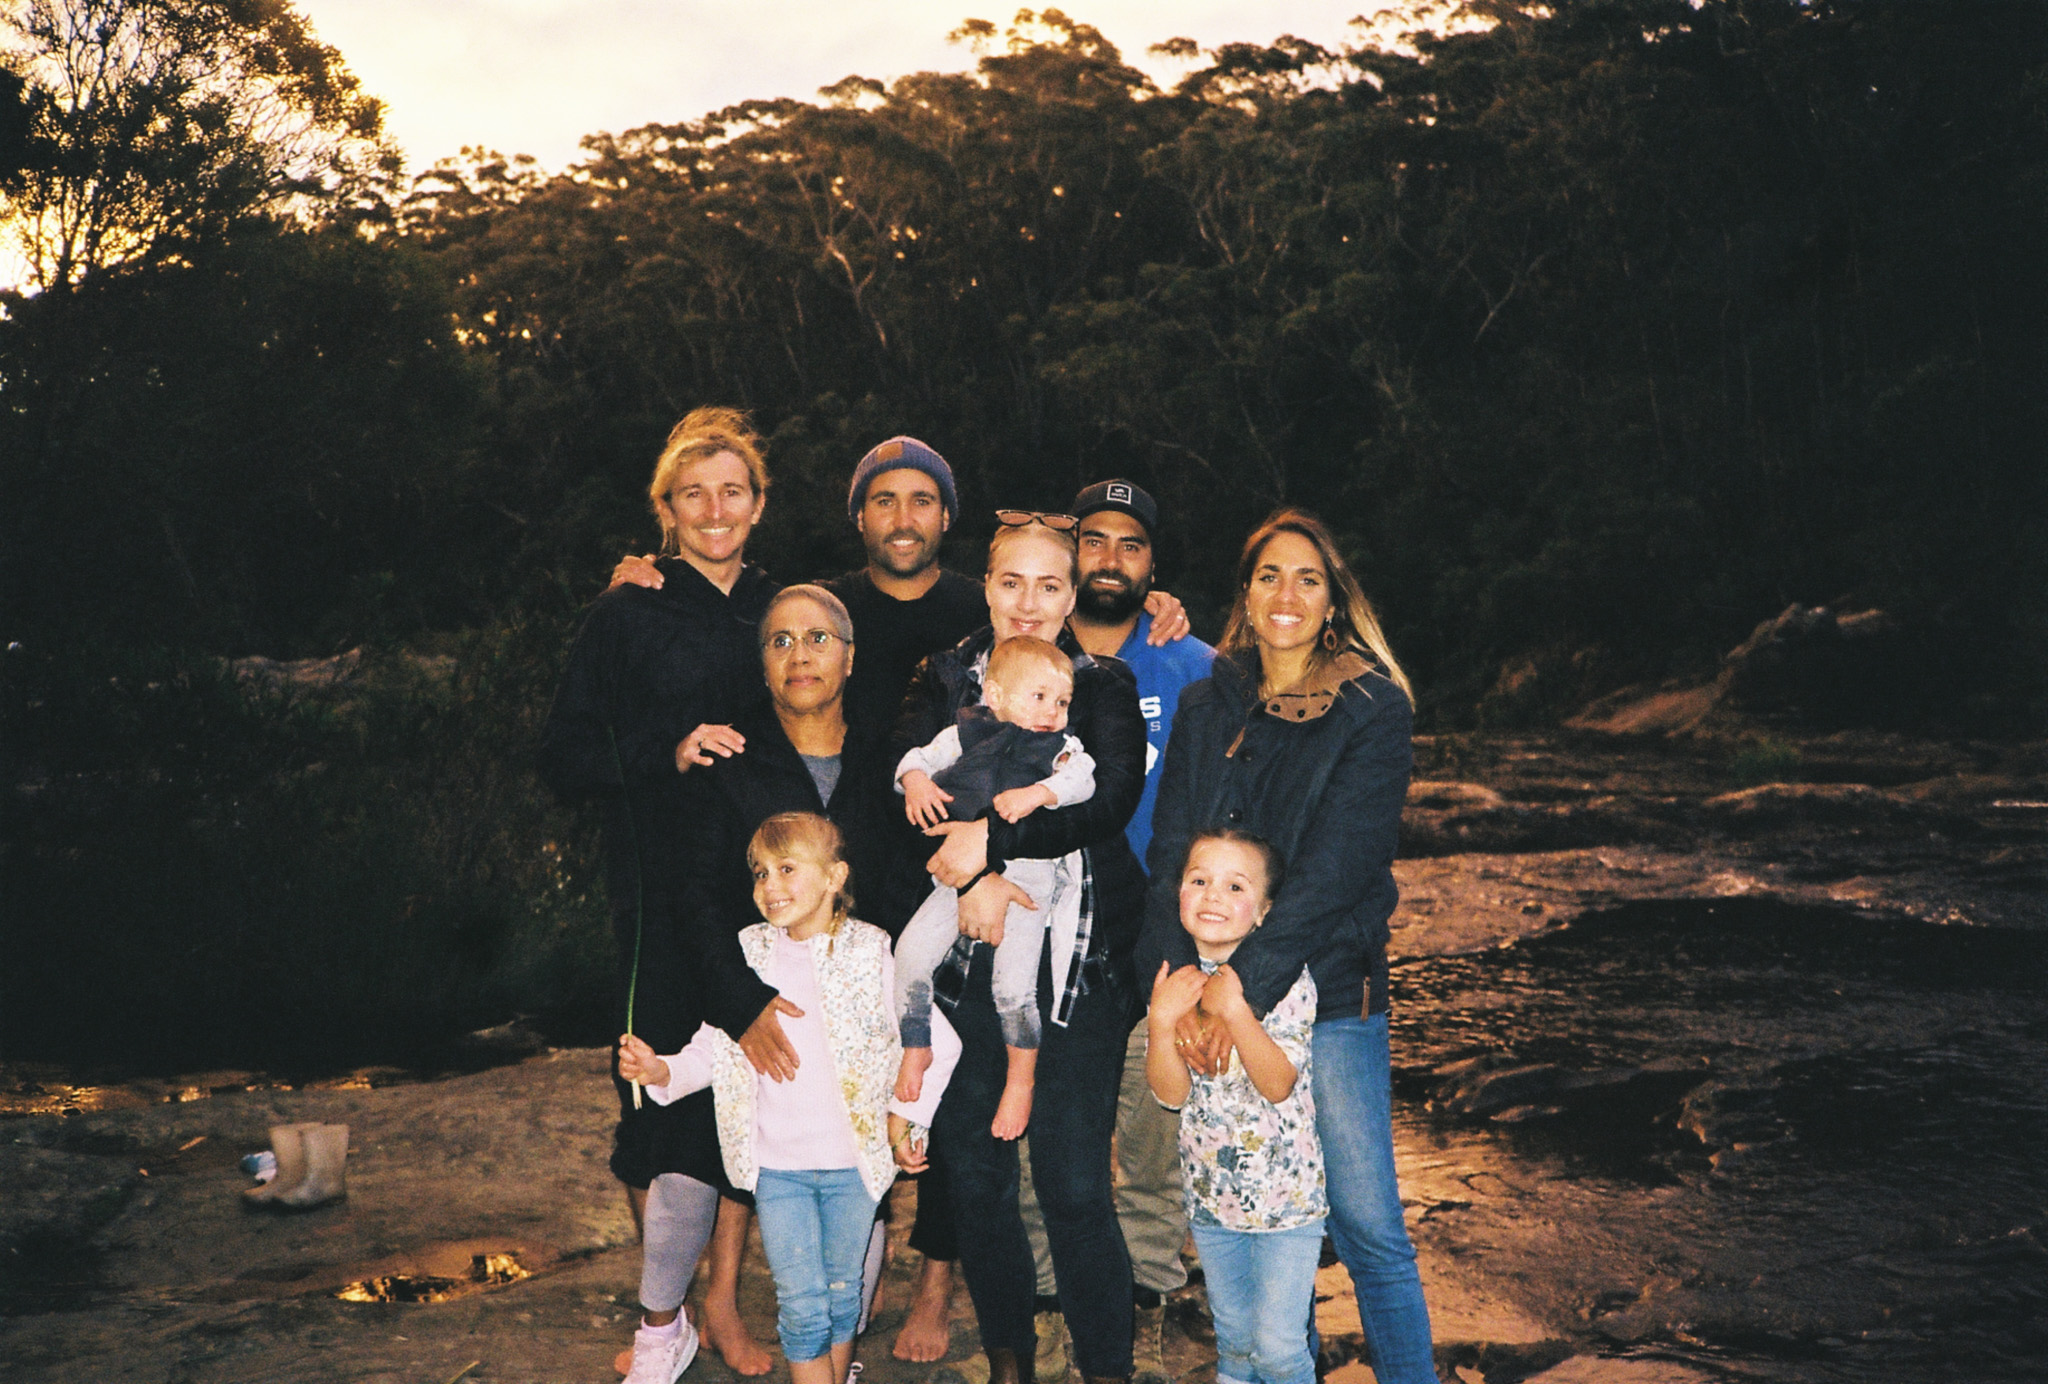 A family stands on rocks with bush in the background. It is sunset. Six adults and three children smile at the camera.